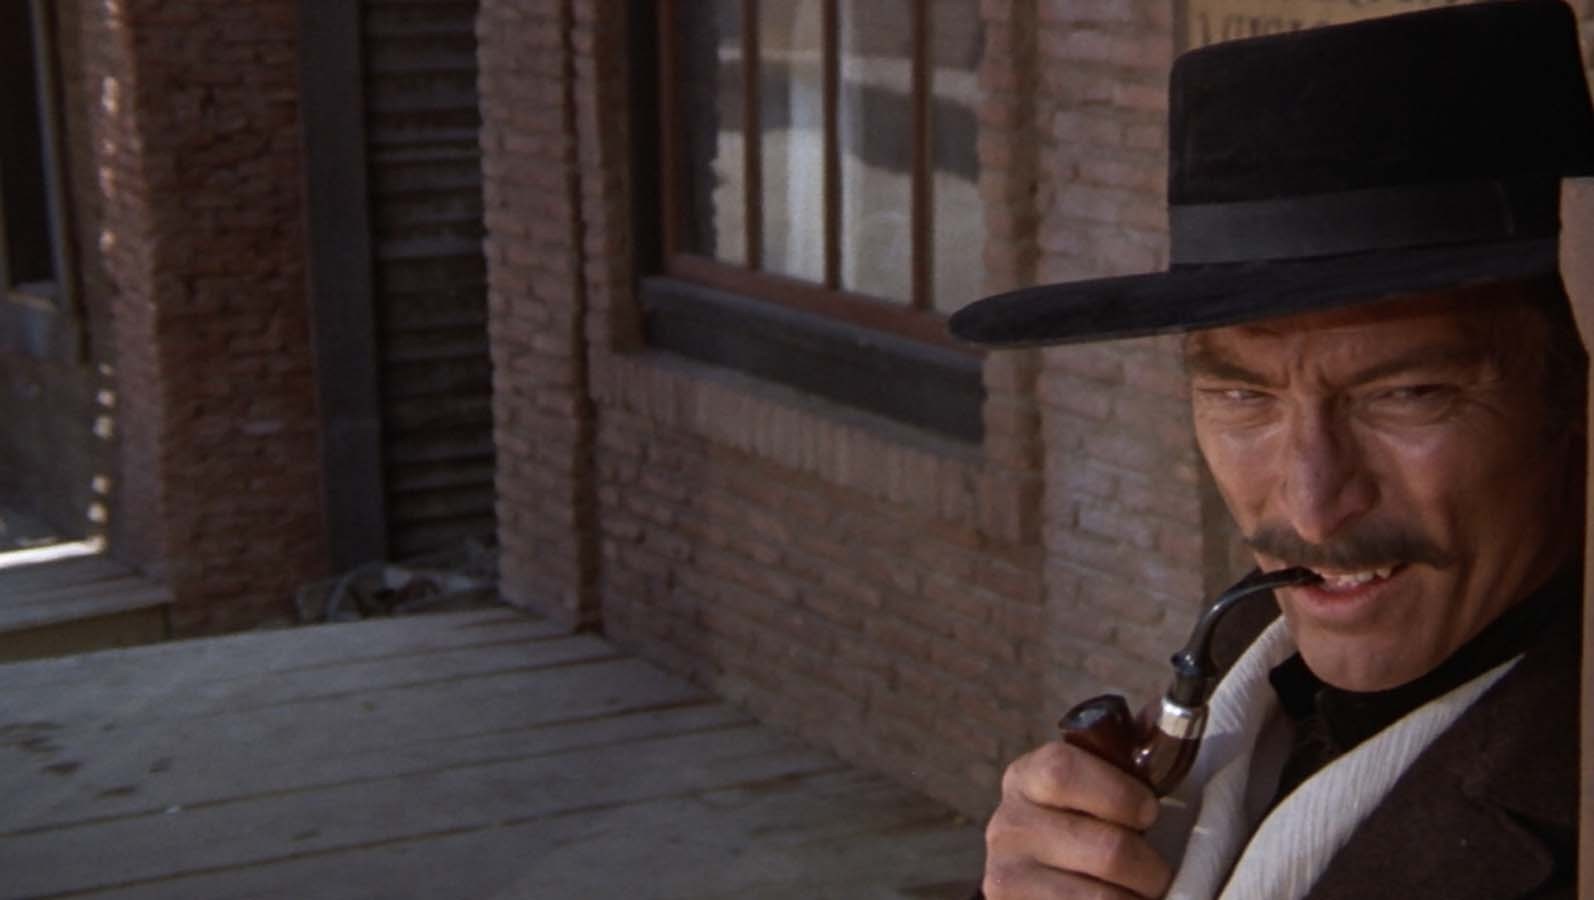 People 1594x900 movies The Good  The Bad and The Ugly Lee Van Cleef pipes smoking hat film stills men